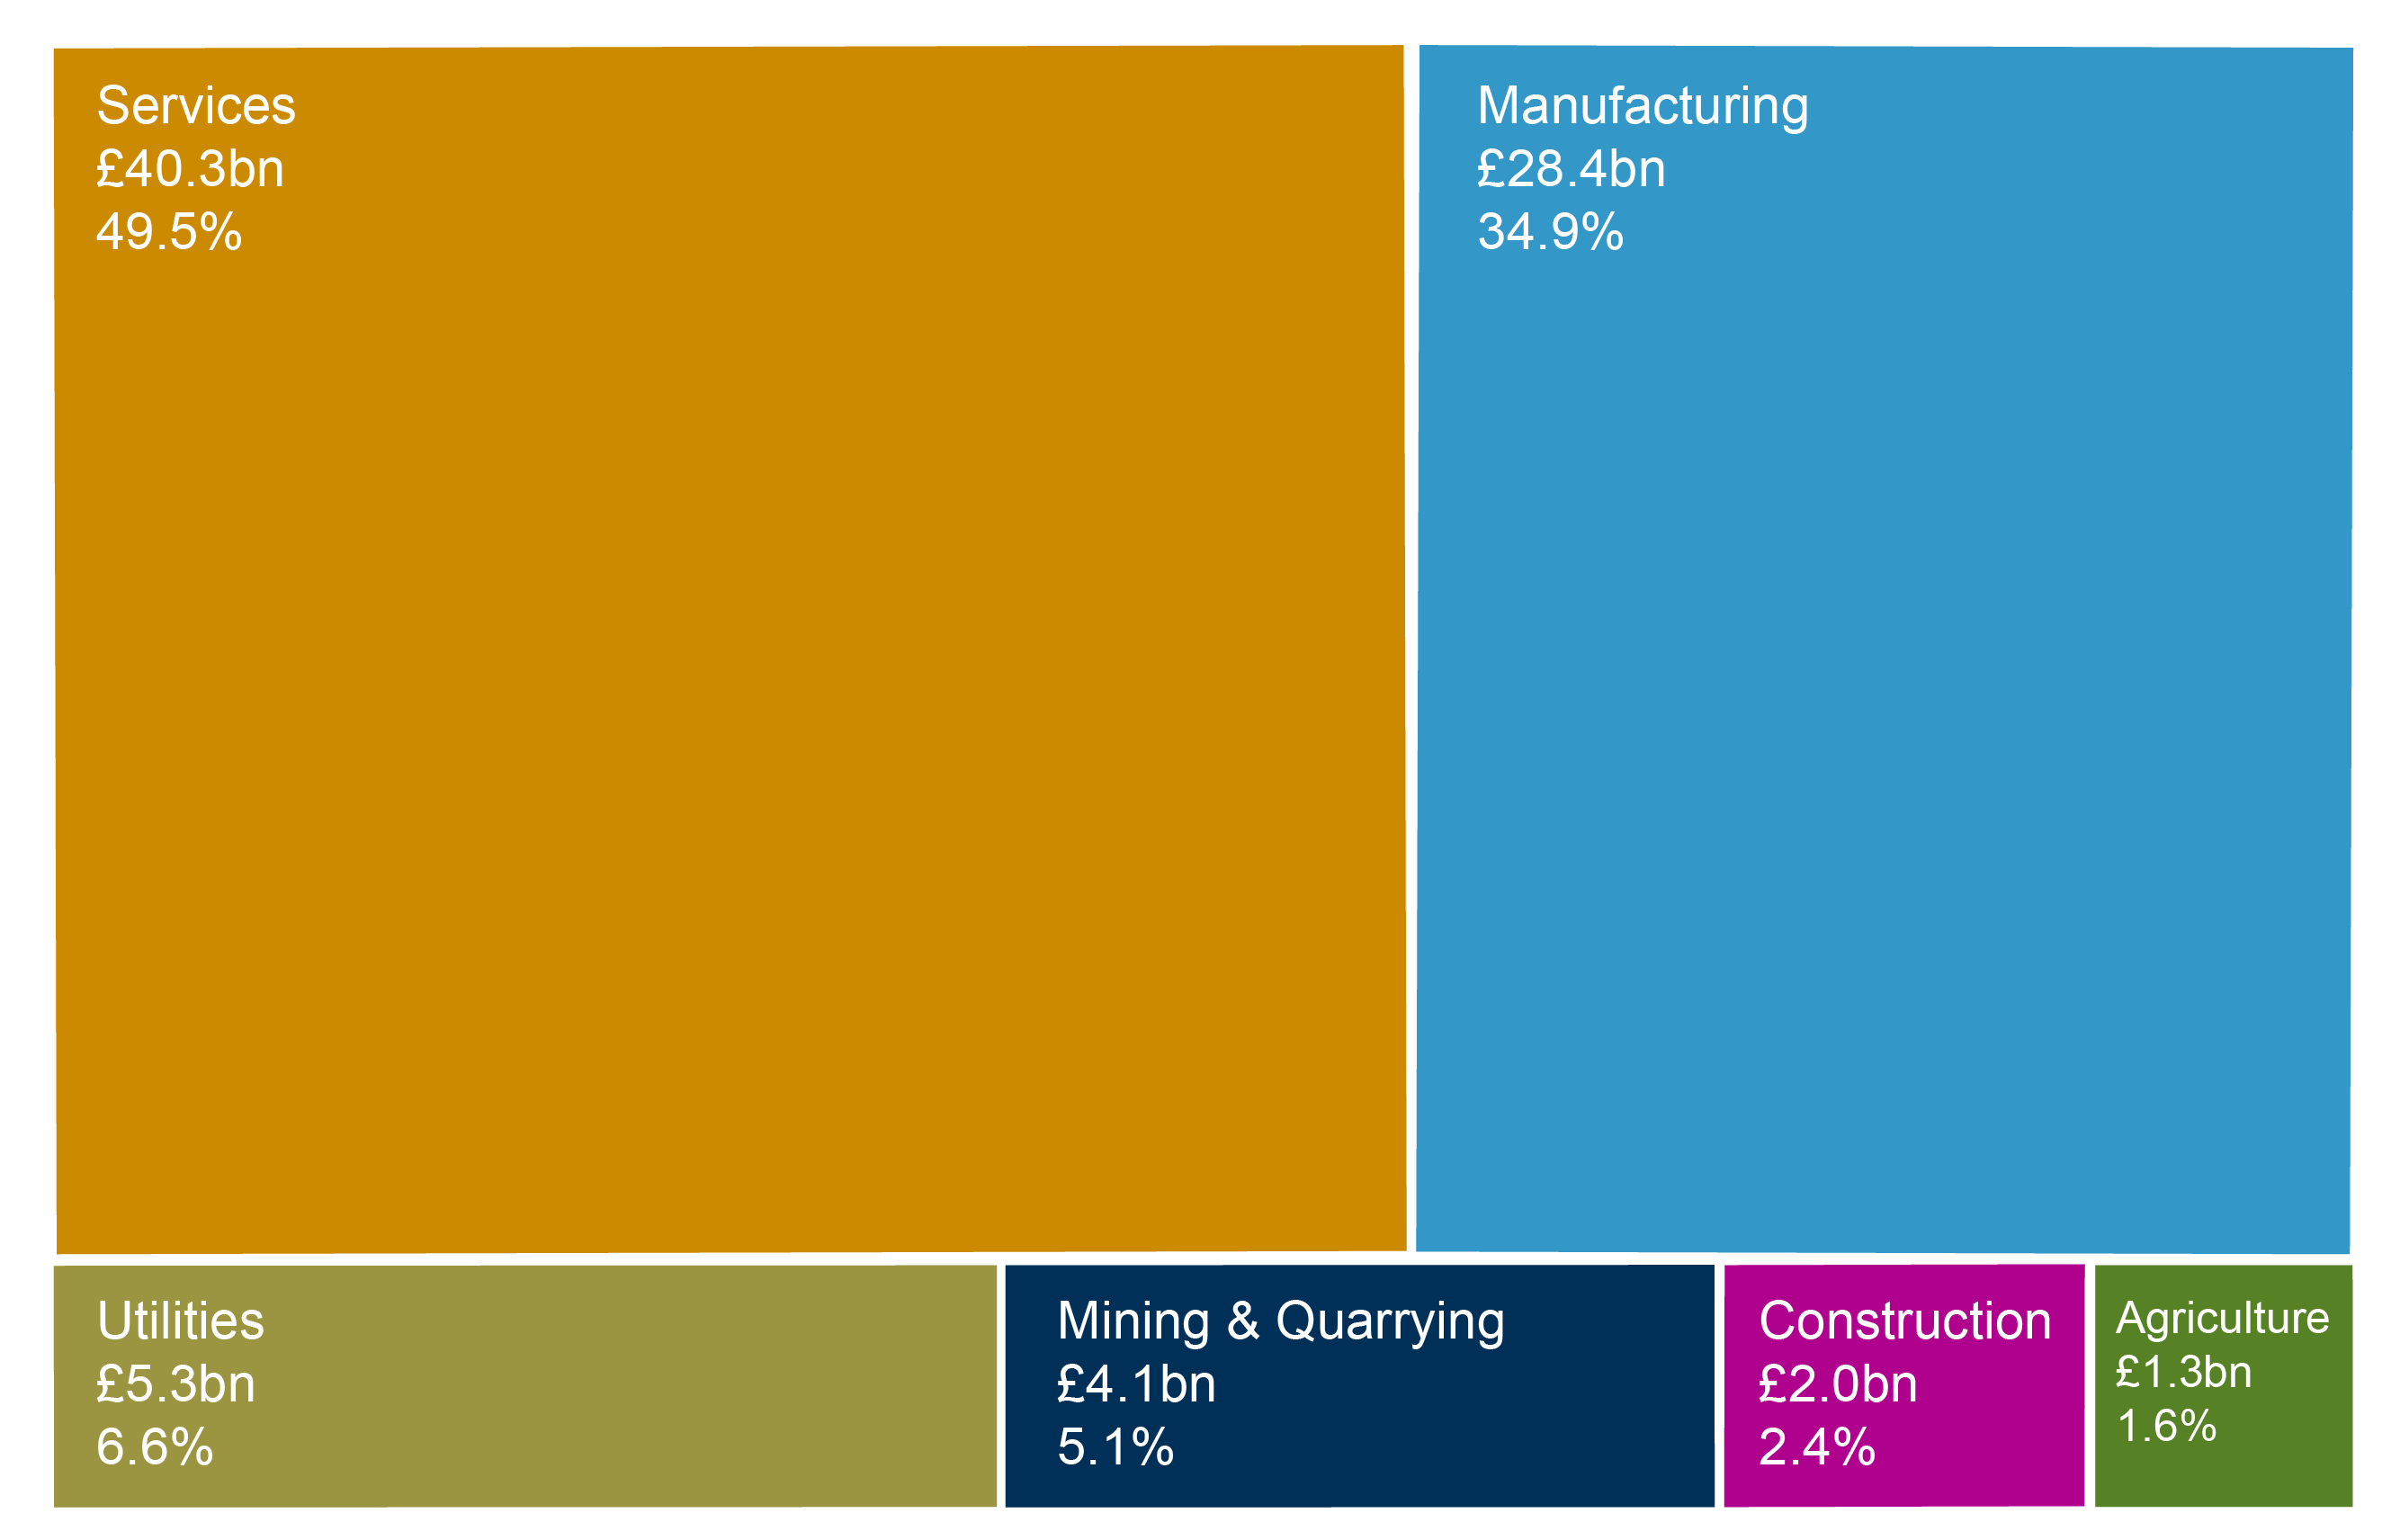 The value of exports by broad sector in Scotland in 2017.